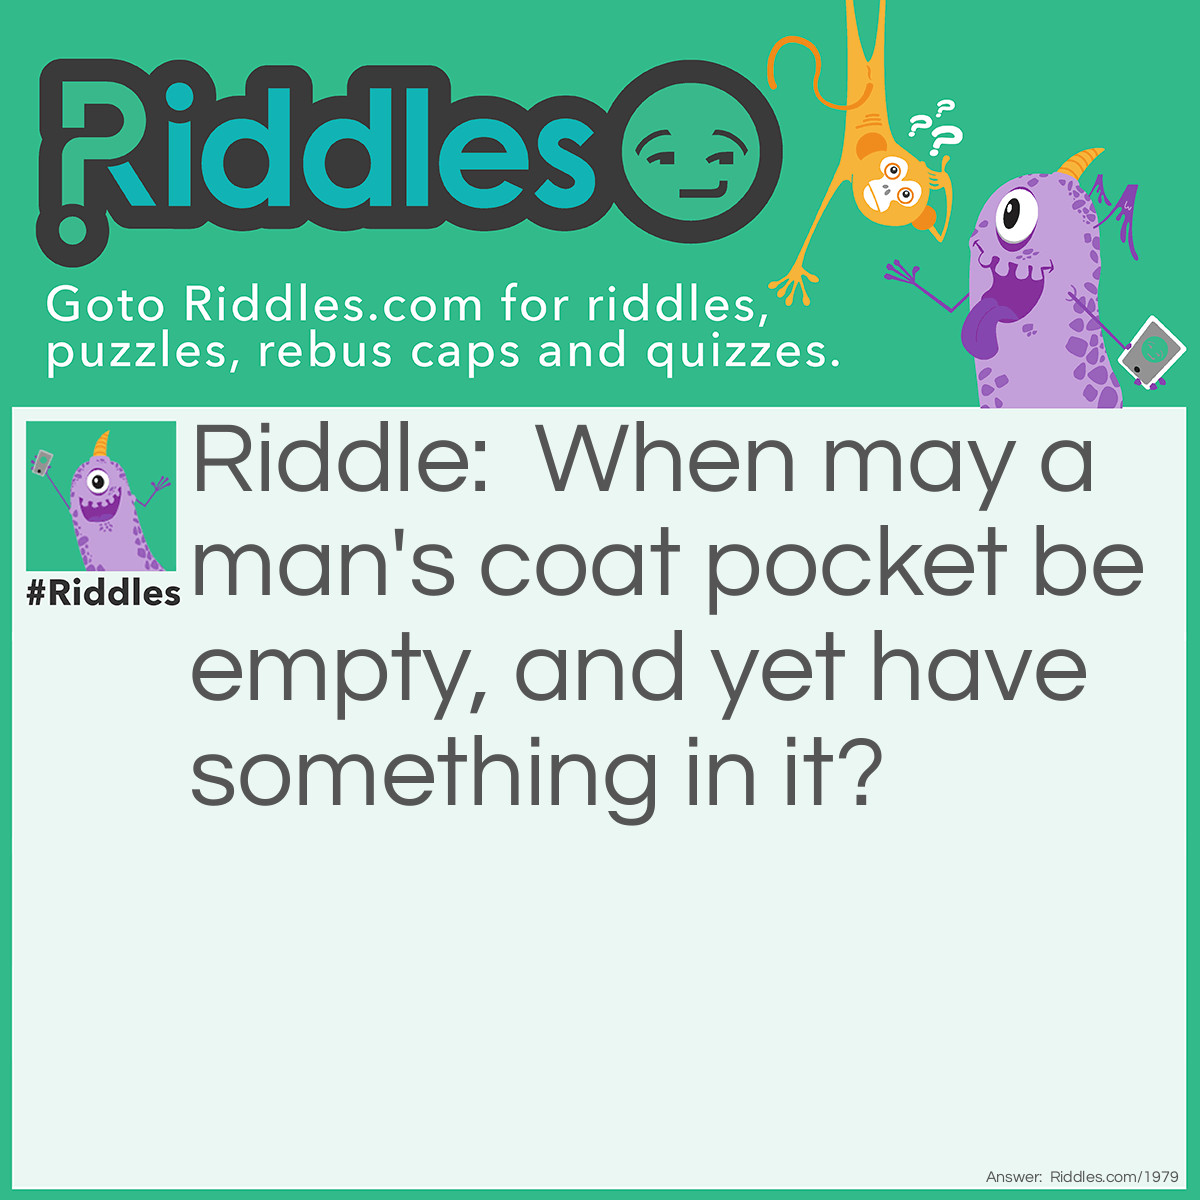 Riddle: When may a man's coat pocket be empty, and yet have something in it? Answer: When it has a hole in it.